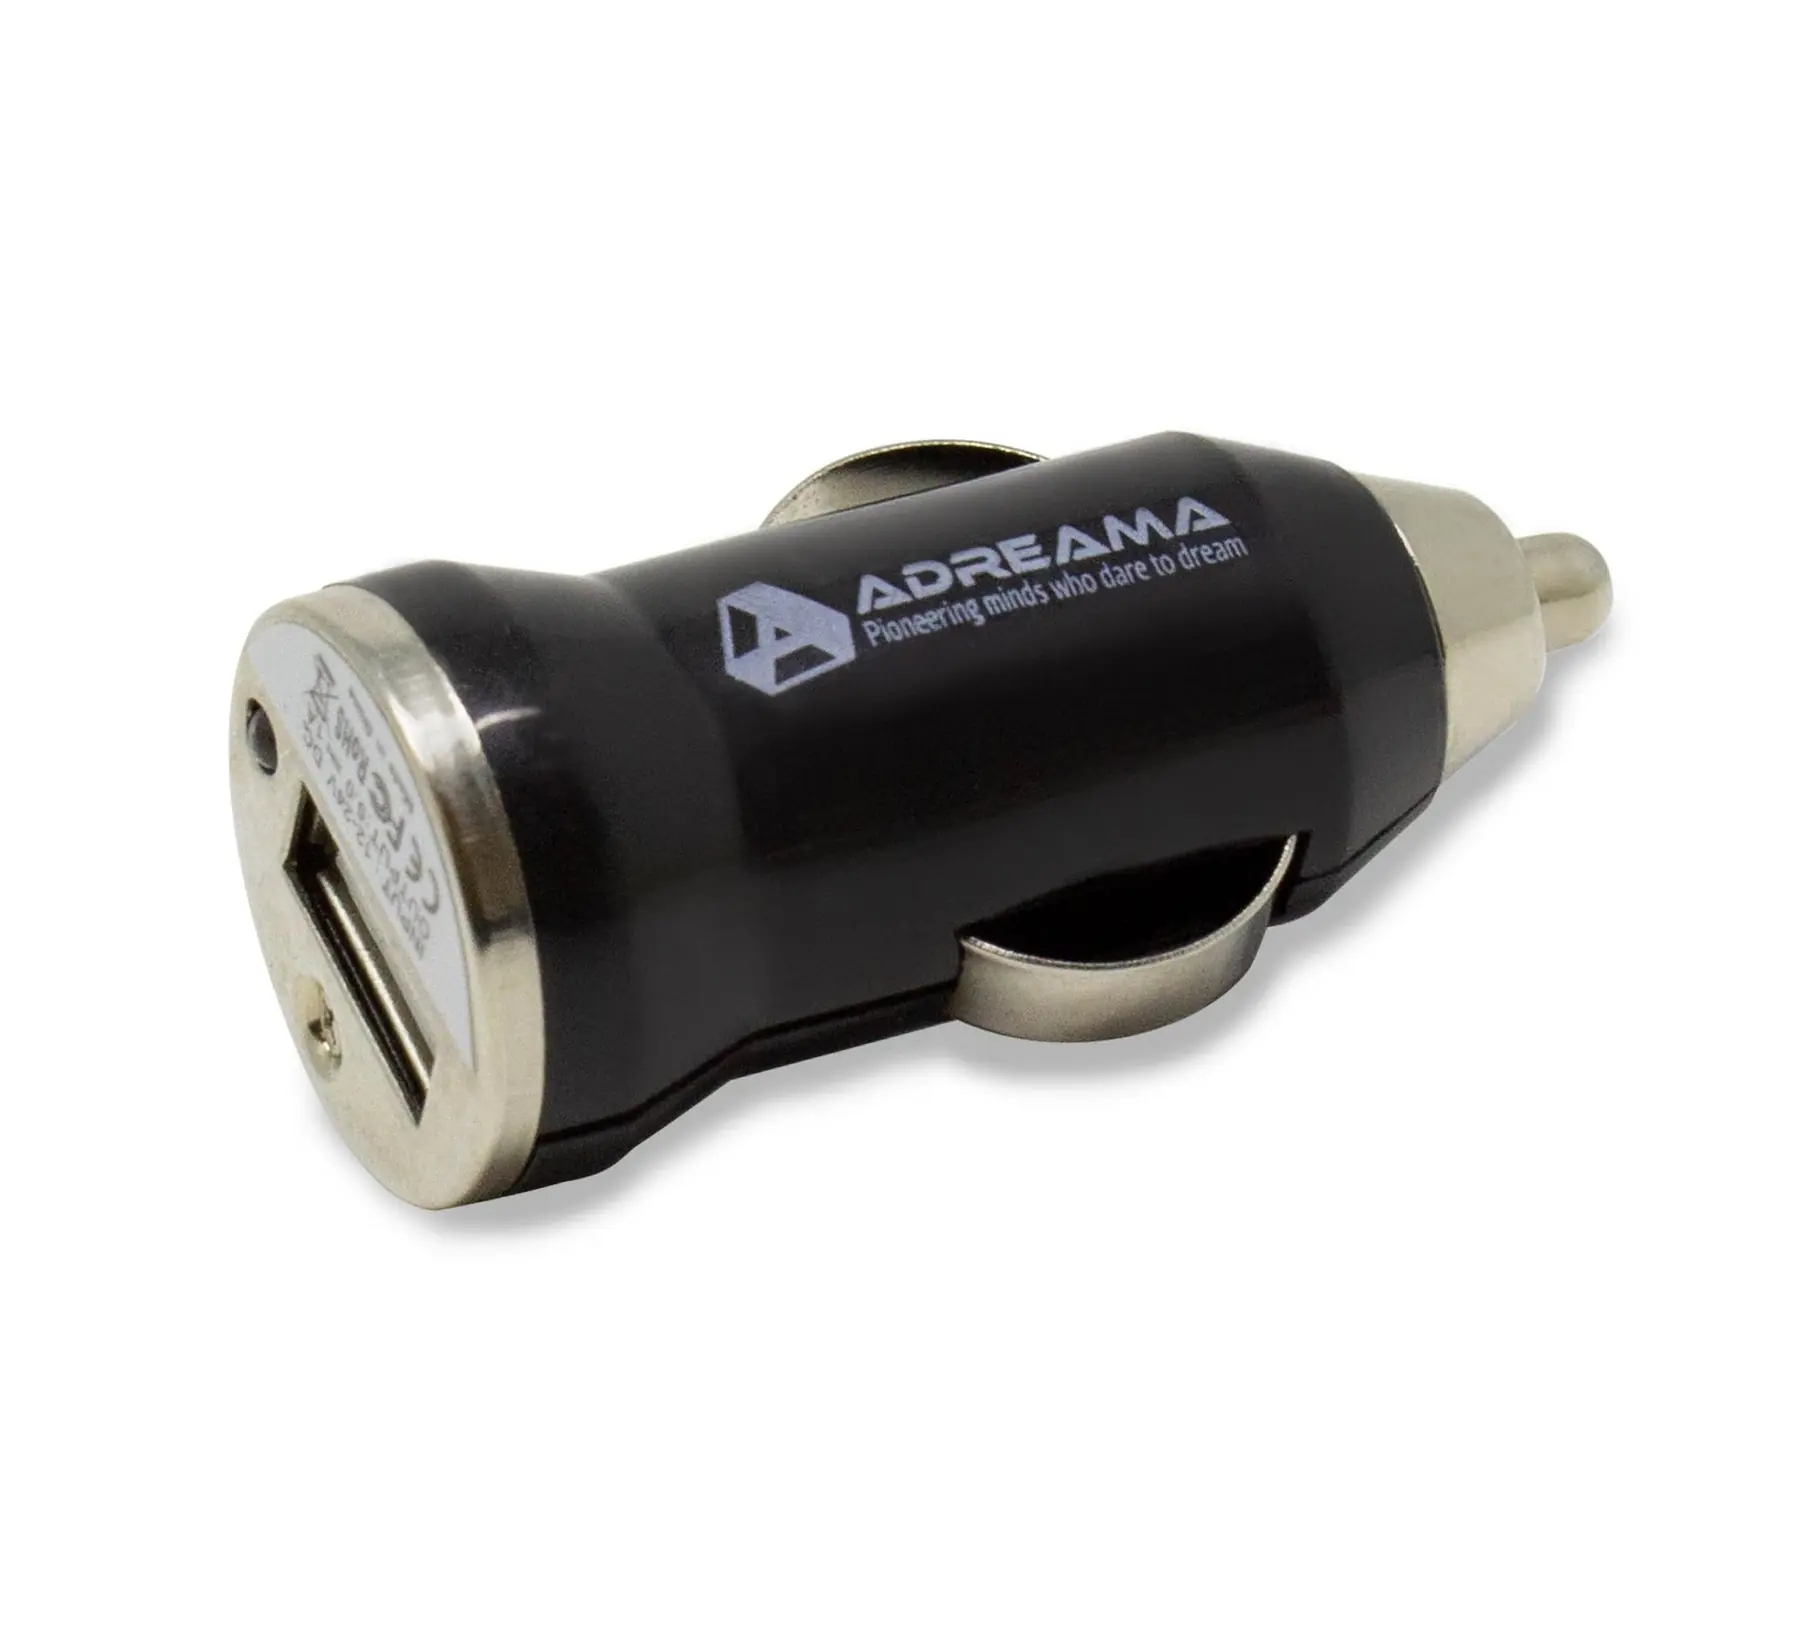 Car Charger with USB-A Port, Black, Angle View.